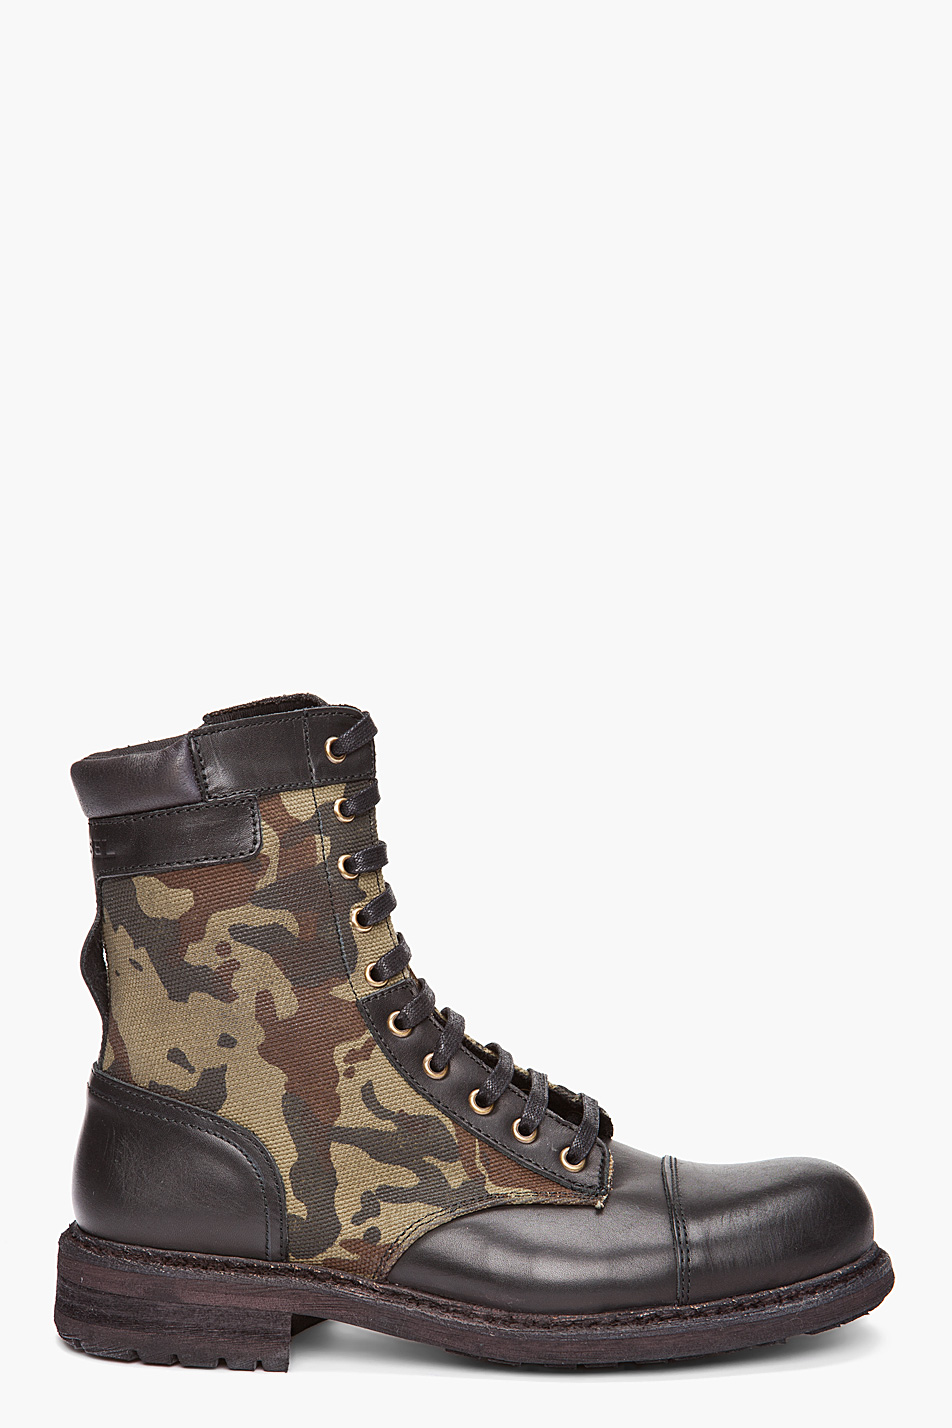 Diesel Cassidy Boots in Black for Men | Lyst